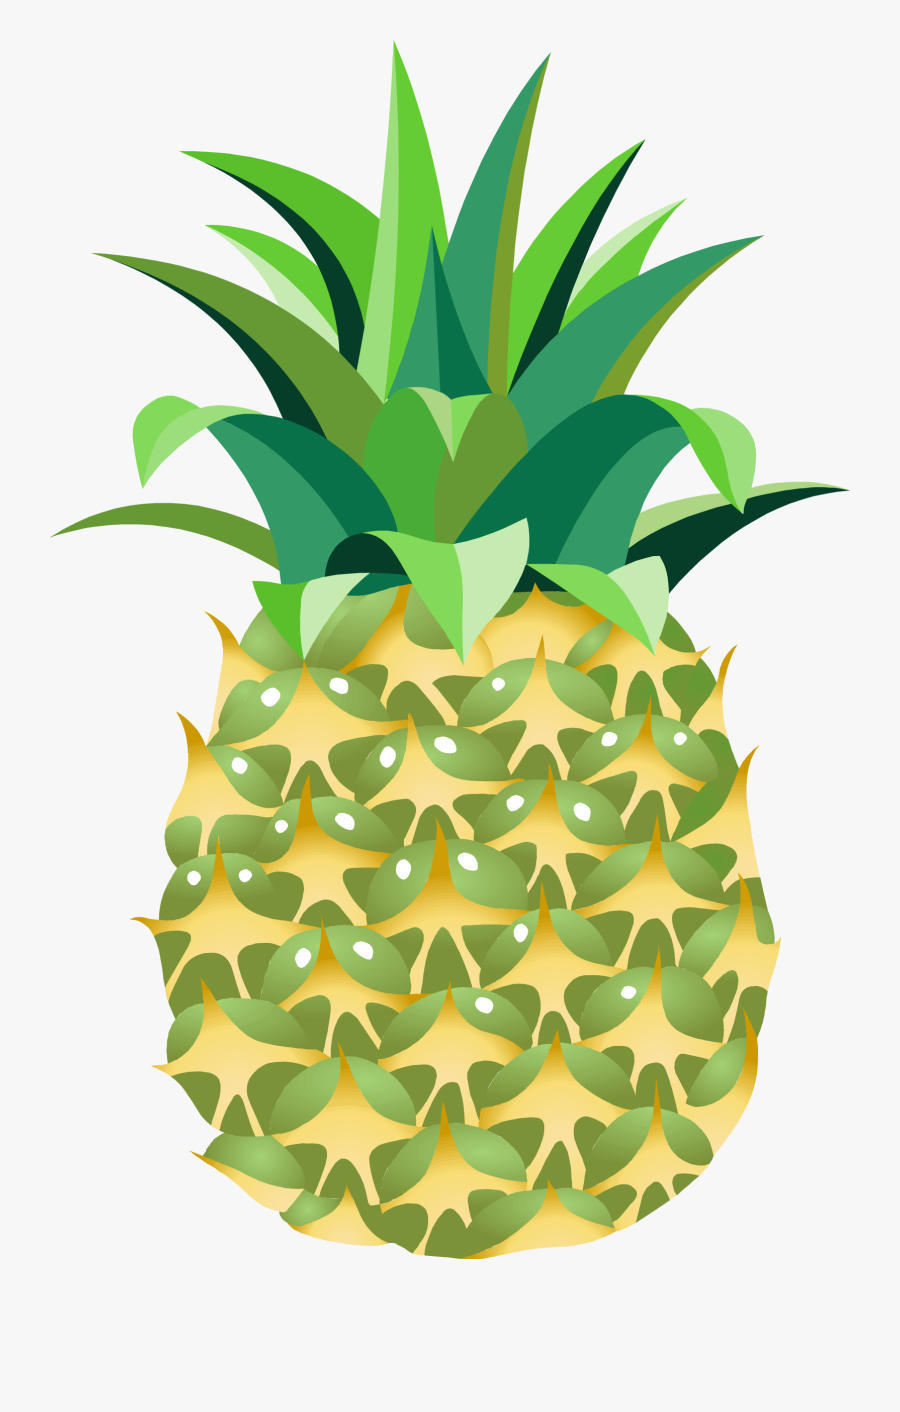 Transparent Pineapple Clipart Black And White - Pineapple Art Invisible Background, Transparent Clipart